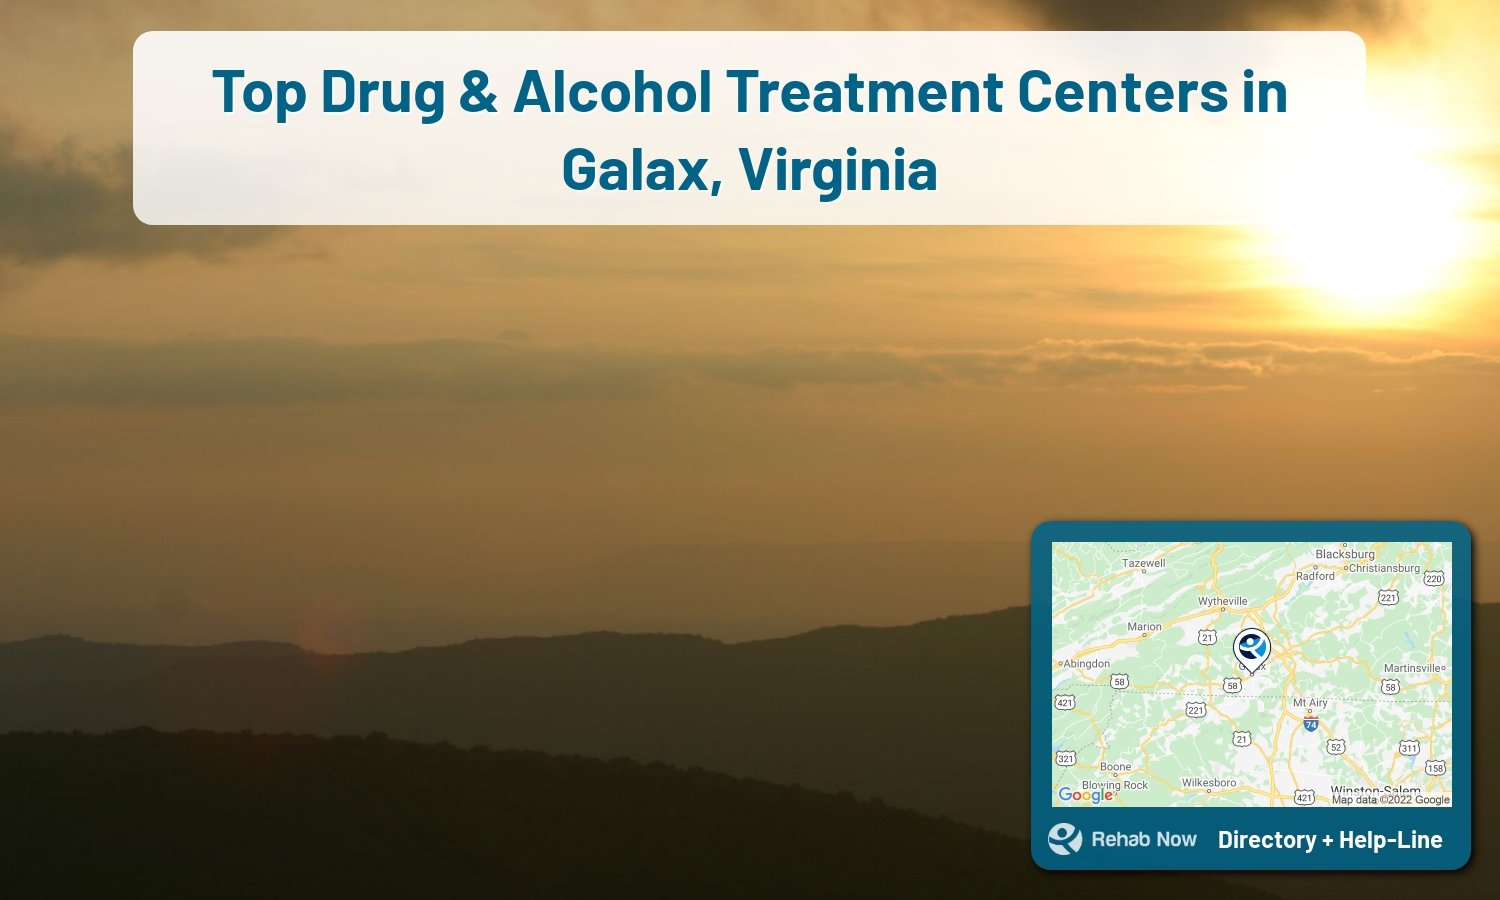 Ready to pick a rehab center in Galax? Get off alcohol, opiates, and other drugs, by selecting top drug rehab centers in Virginia